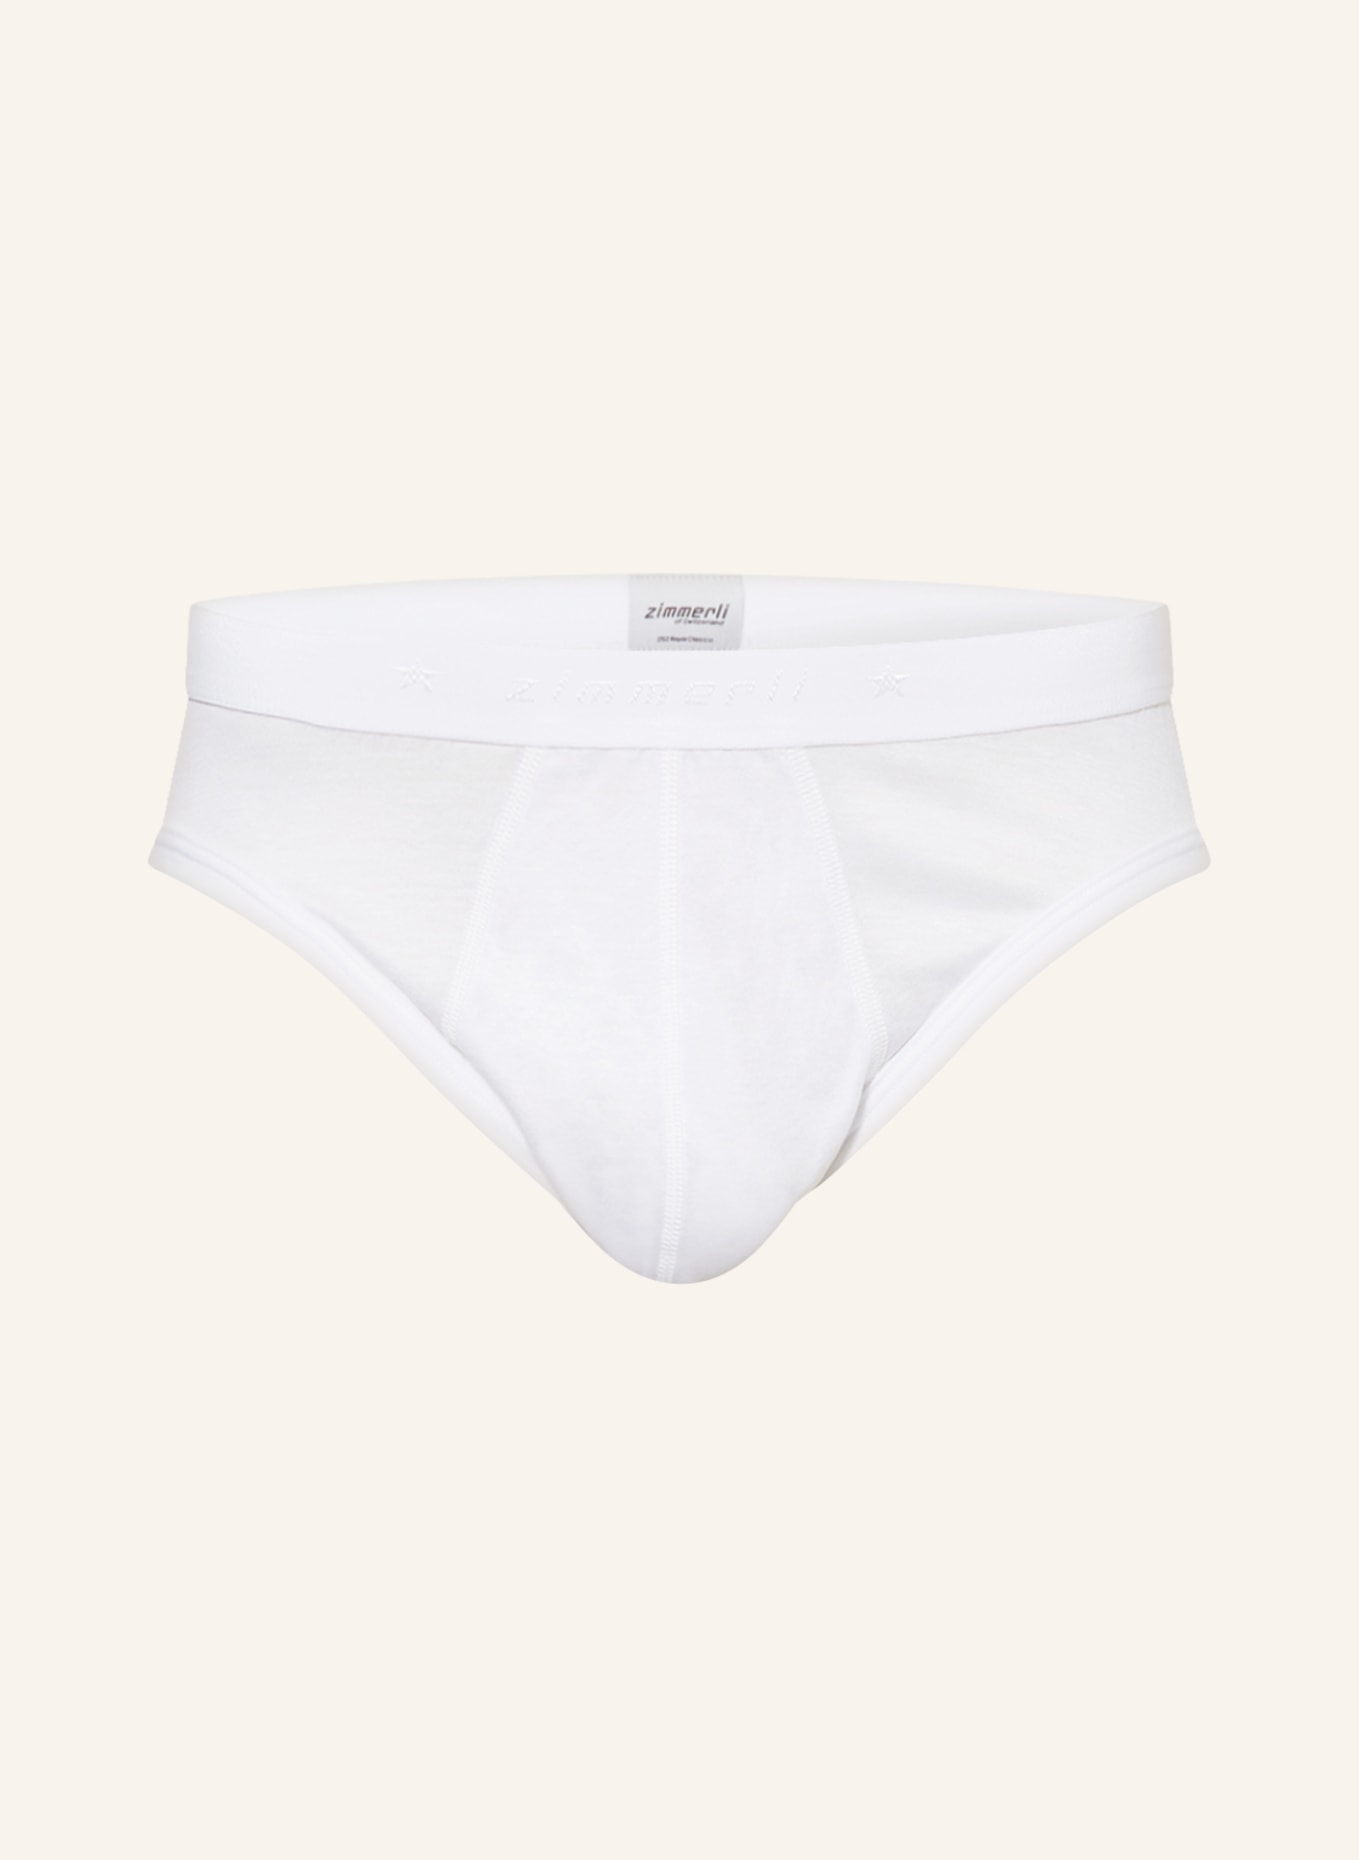 zimmerli Briefs ROYAL CLASSIC, Color: WHITE (Image 1)